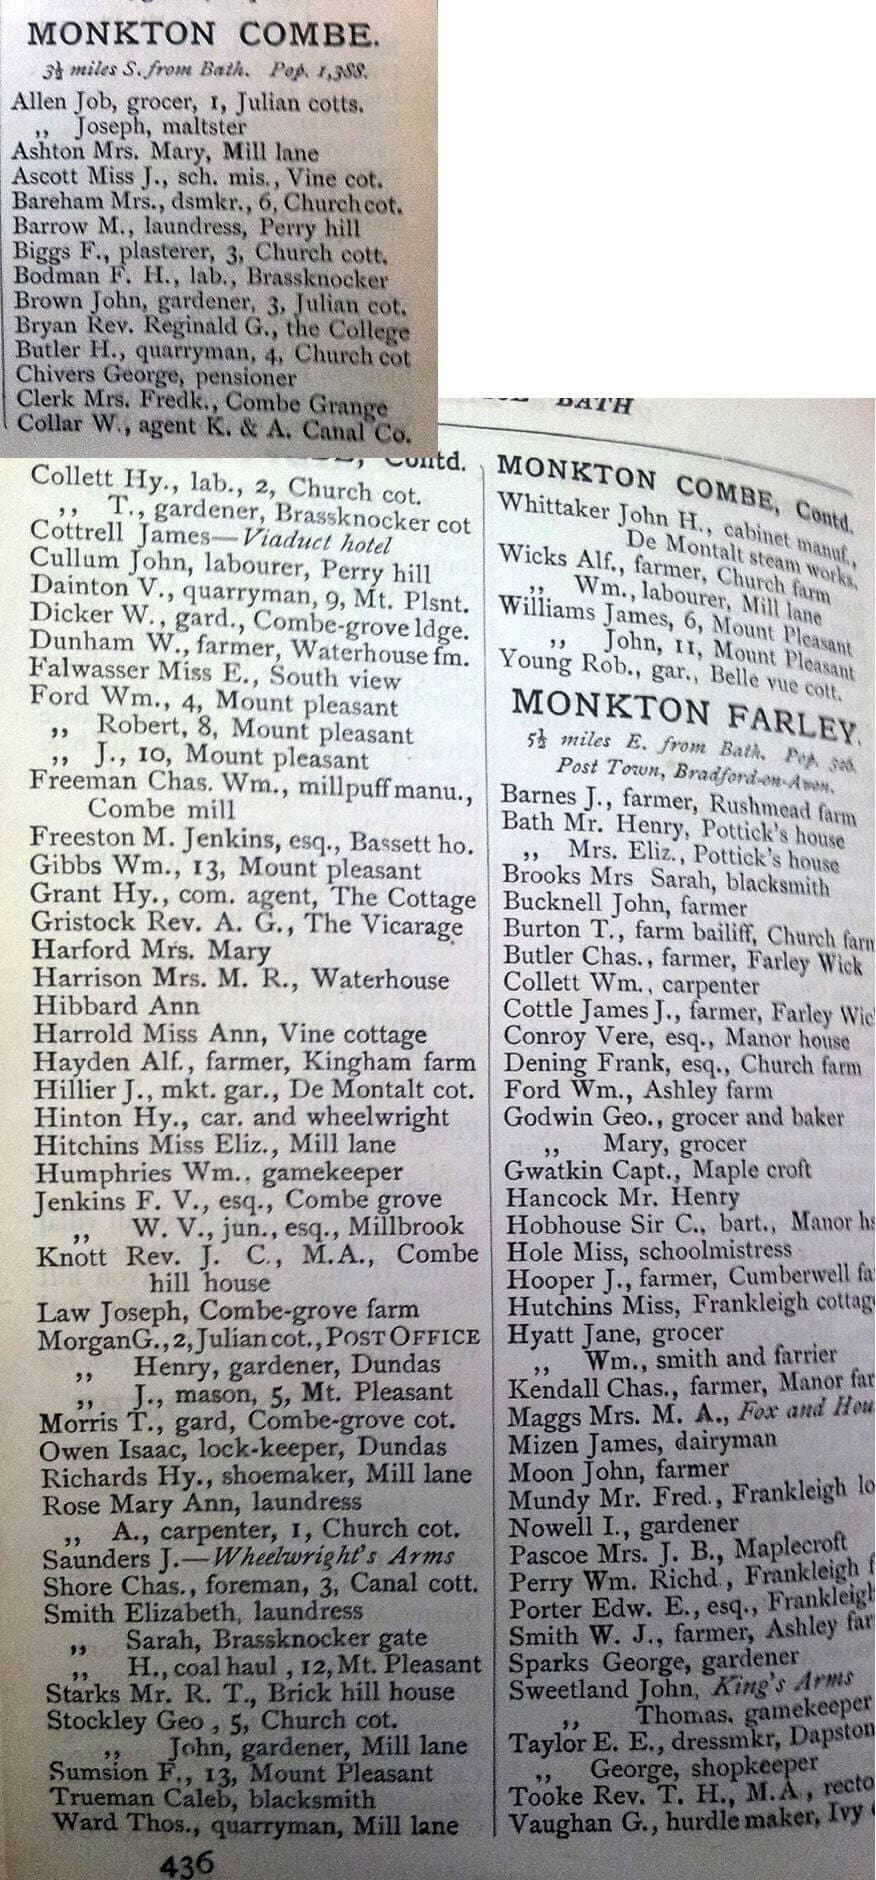 1880 Post Office Directory for Monkton Combe